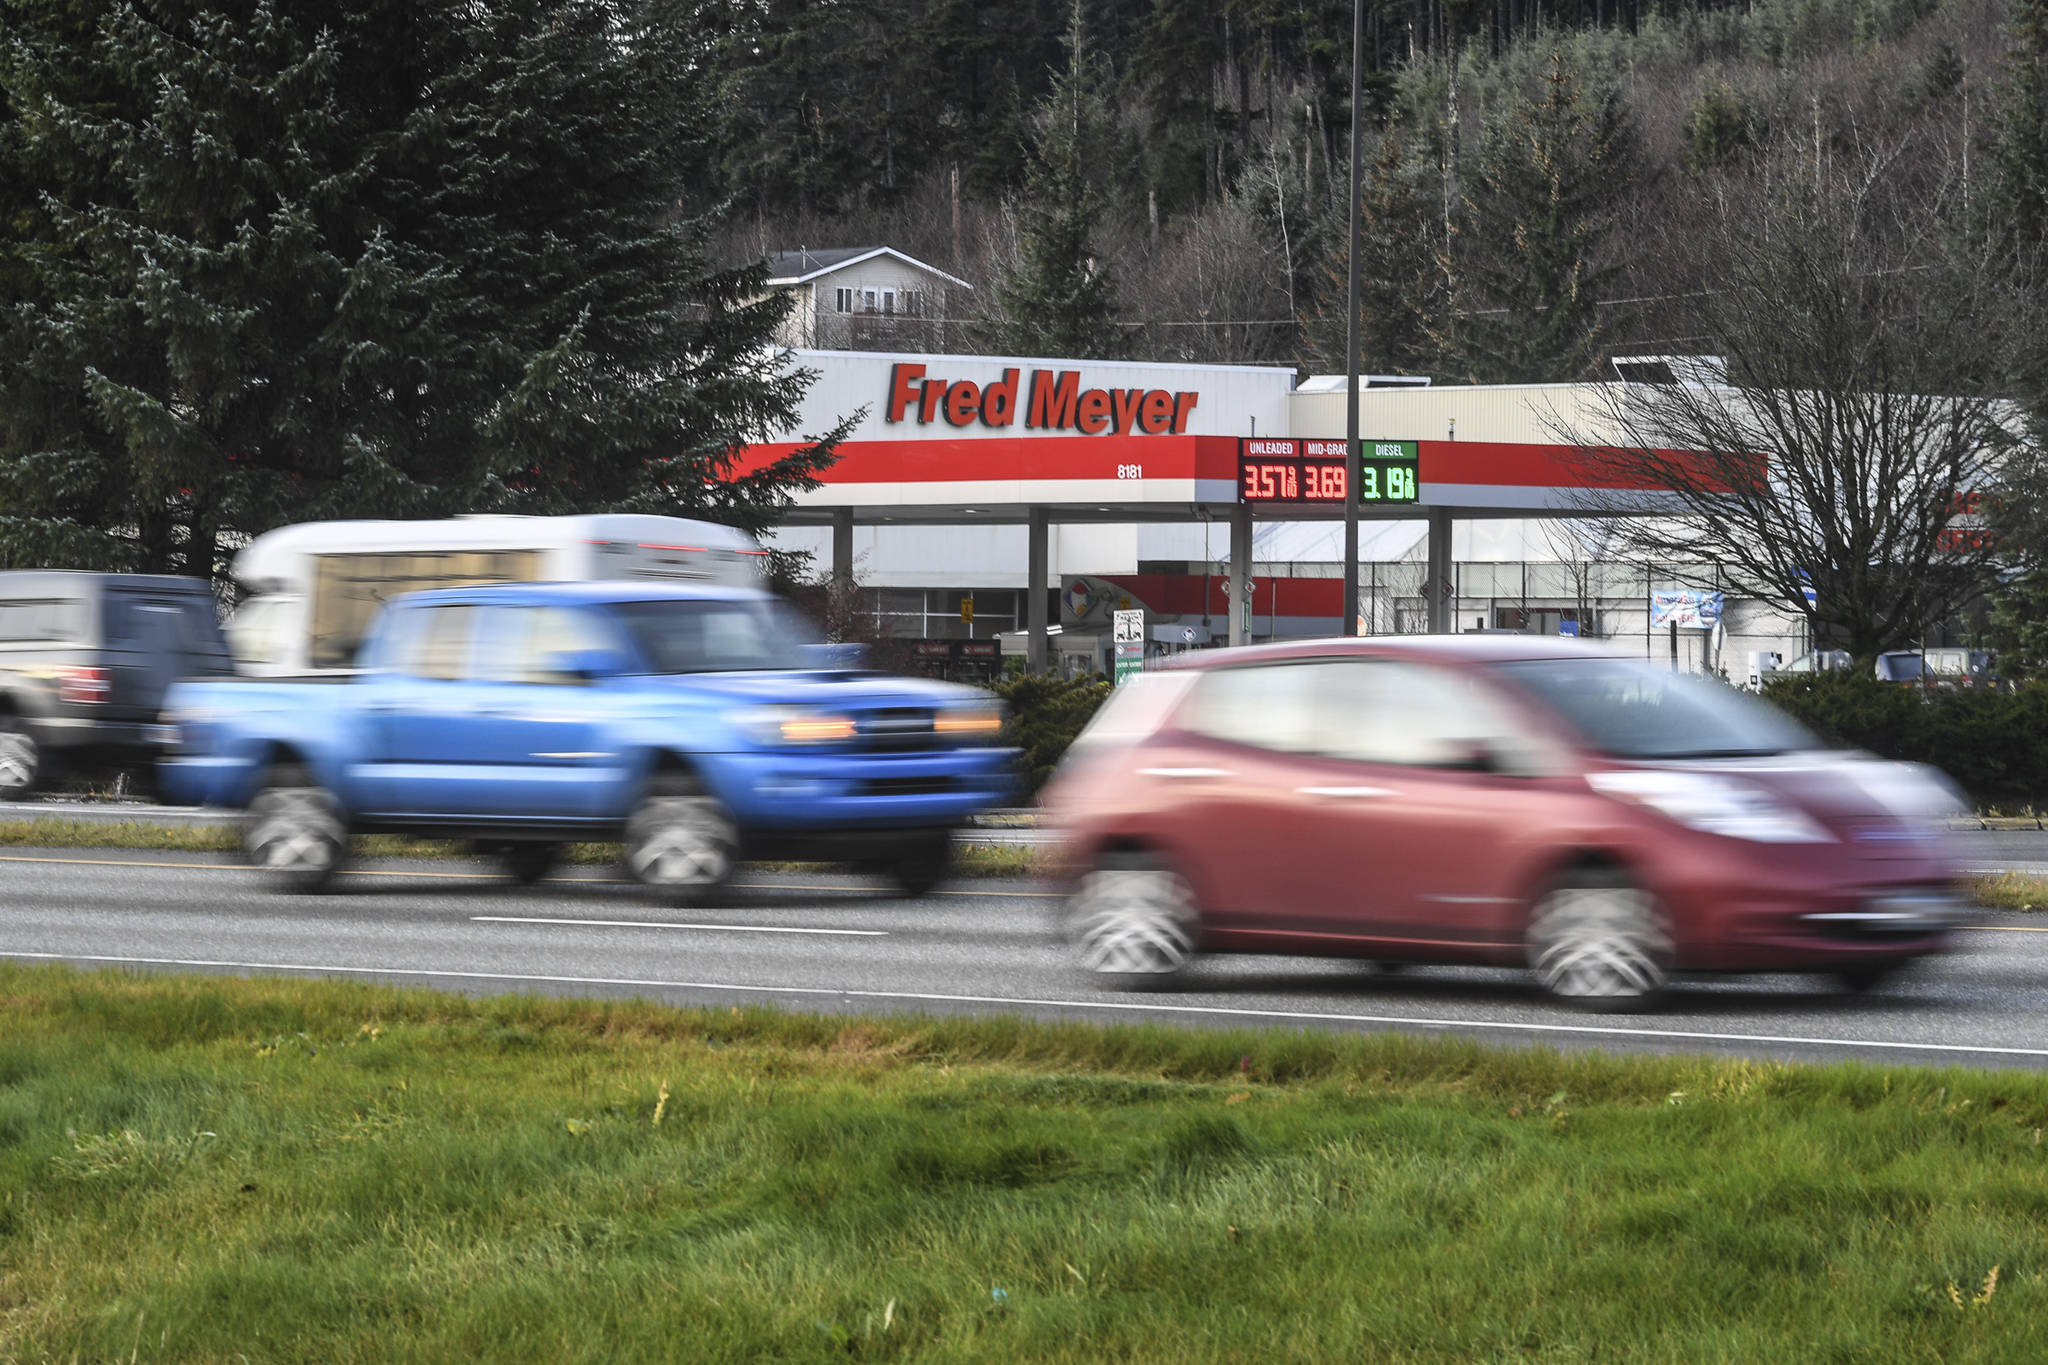 Traffic at the Fred Meyer intersection, formally known as Egan and Yandukin drives, on Tuesday, Nov. 5, 2019. The Department of Transportation and Public Facilities is holding an open house meeting at the Nugget Mall Community Room from 4-7 p.m. on Nov. 19 to share a traffic study and how DOT&PF is improving the intersection. (Michael Penn | Juneau Empire)